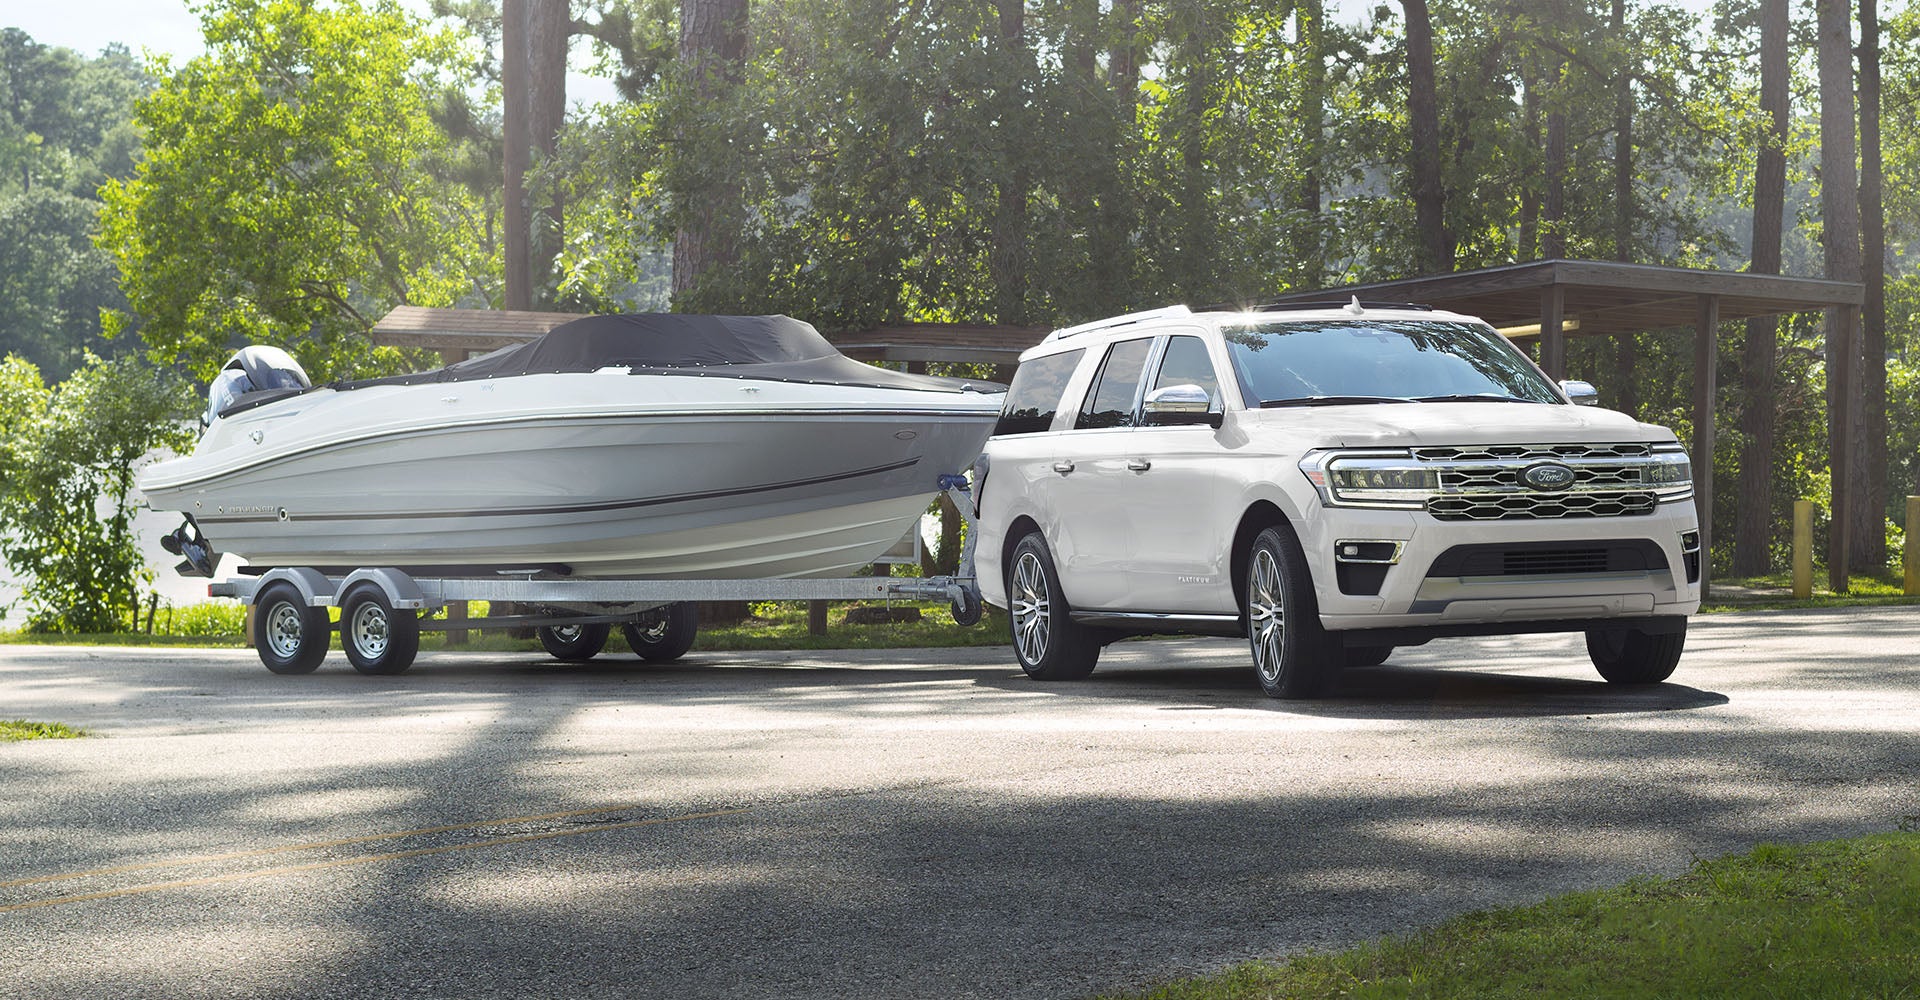 2022 Ford Expedition Towing Capacity